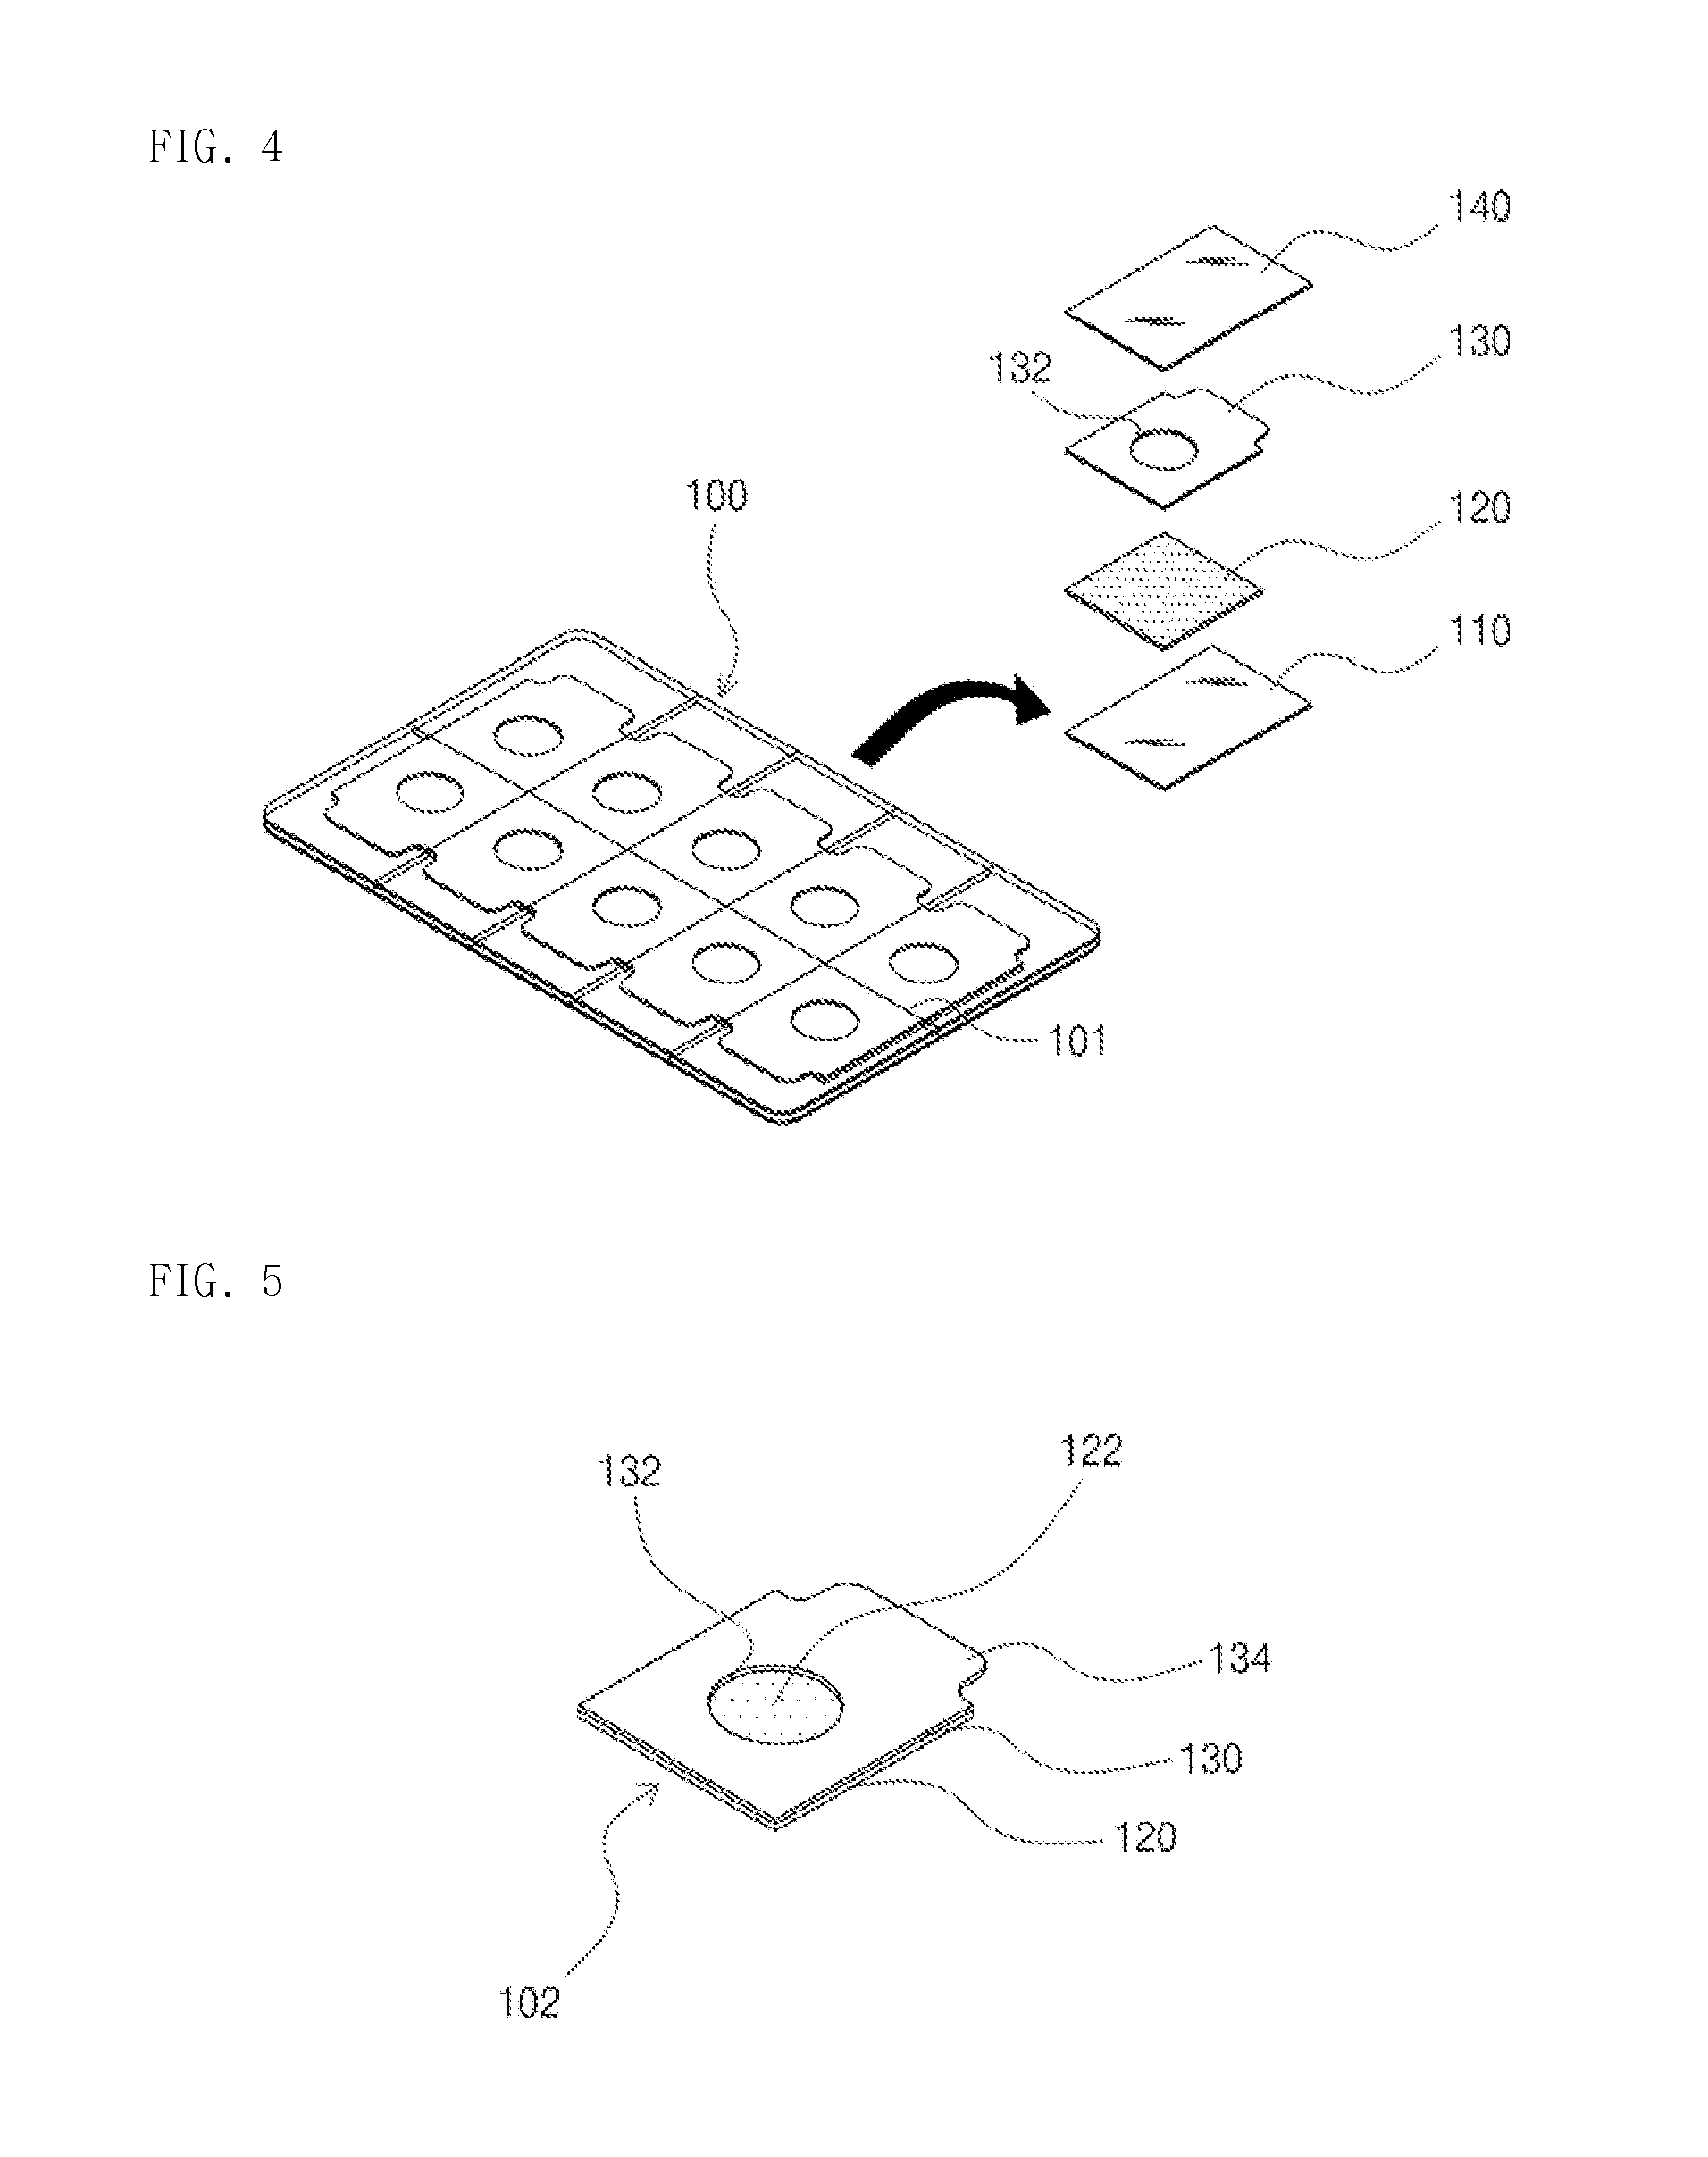 Tab electrode and lead wire for connecting to the same